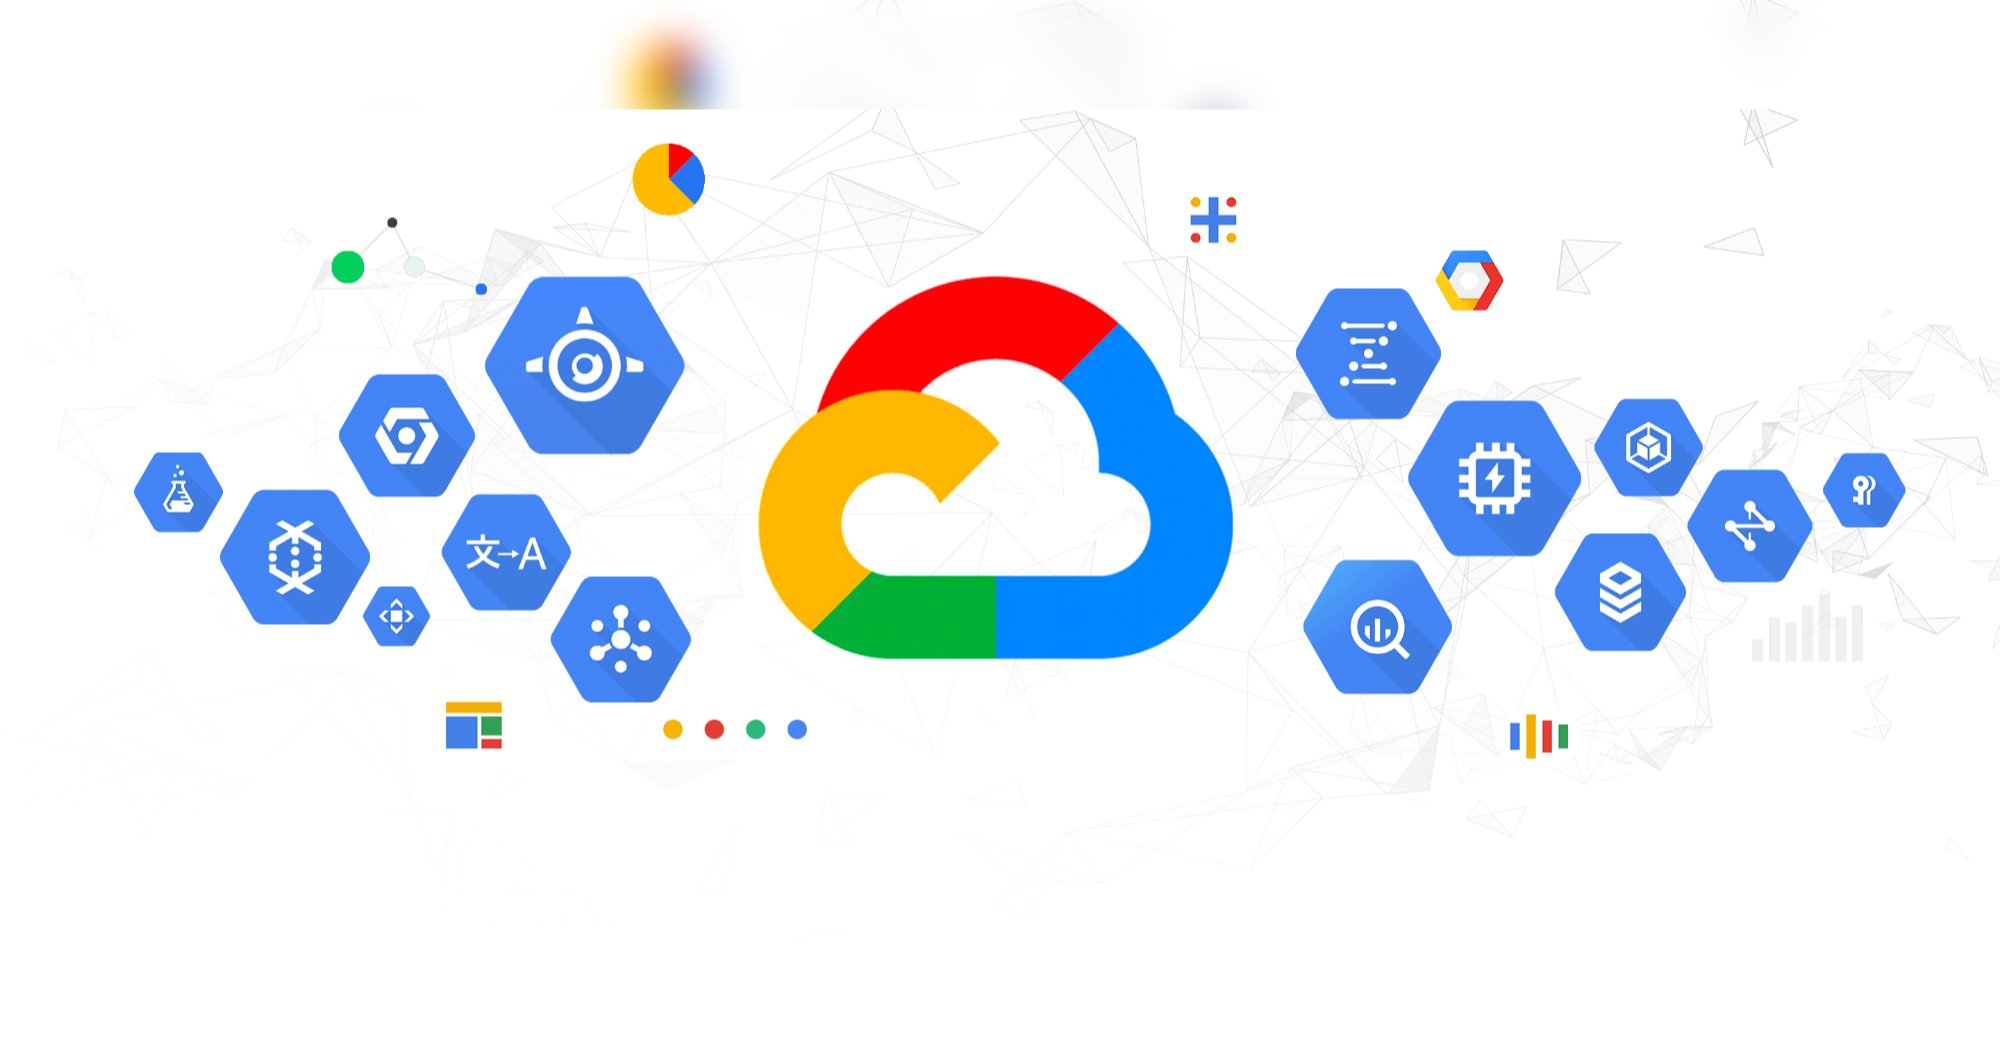 Creating a Windows bootable image for Google Cloud